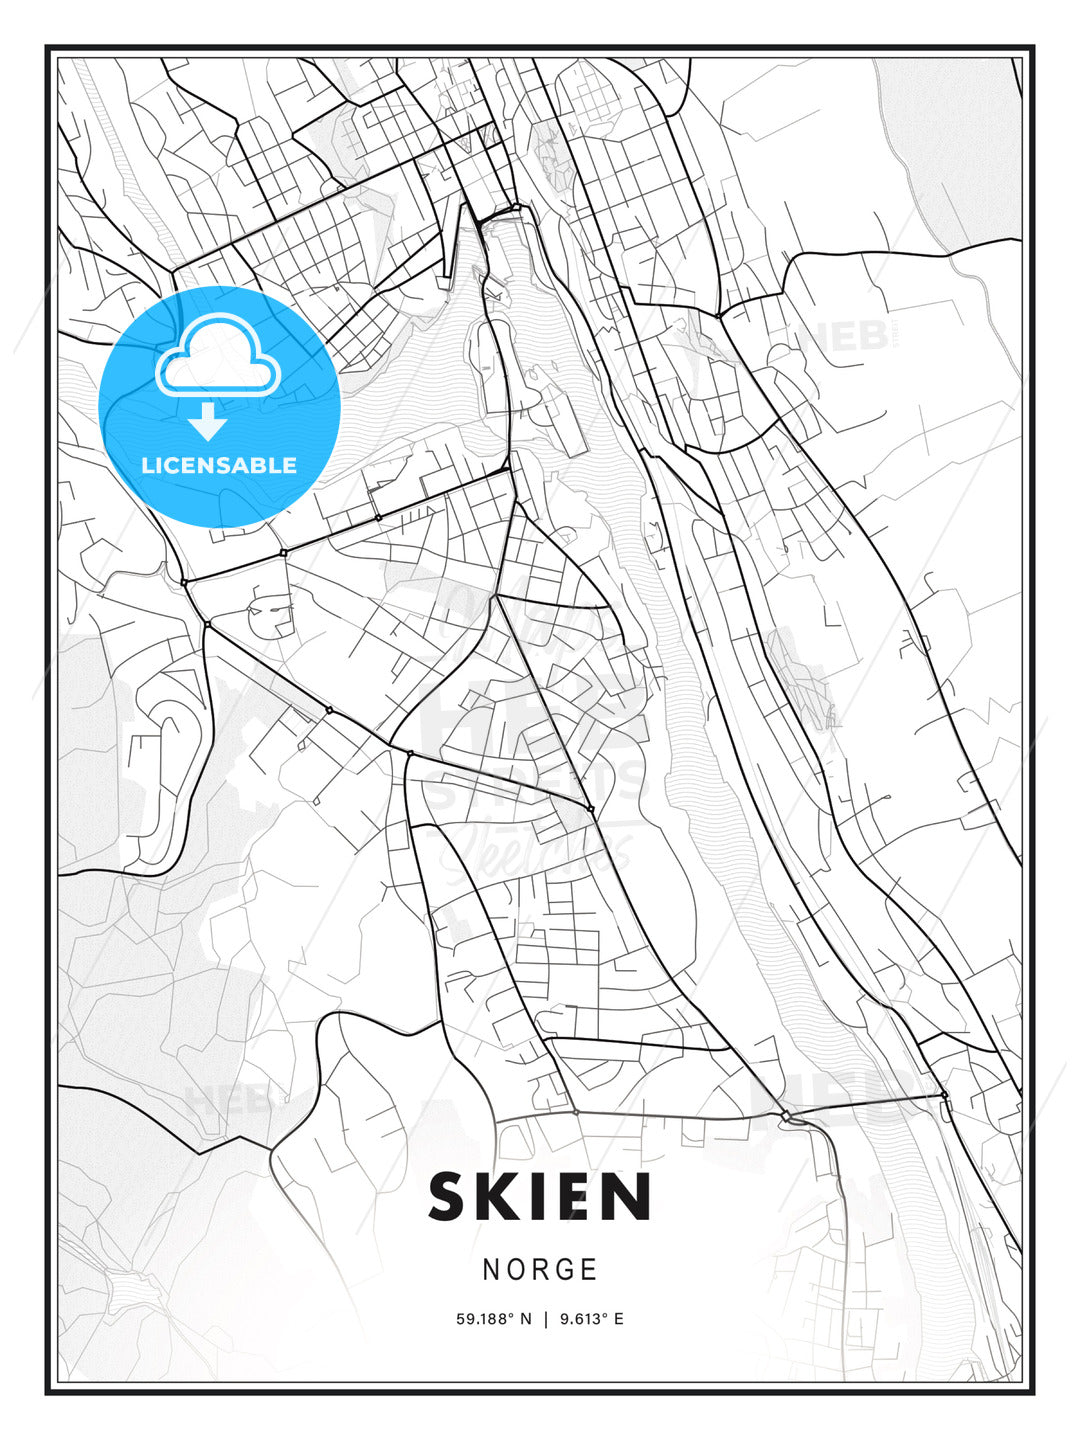 Skien, Norway, Modern Print Template in Various Formats - HEBSTREITS Sketches